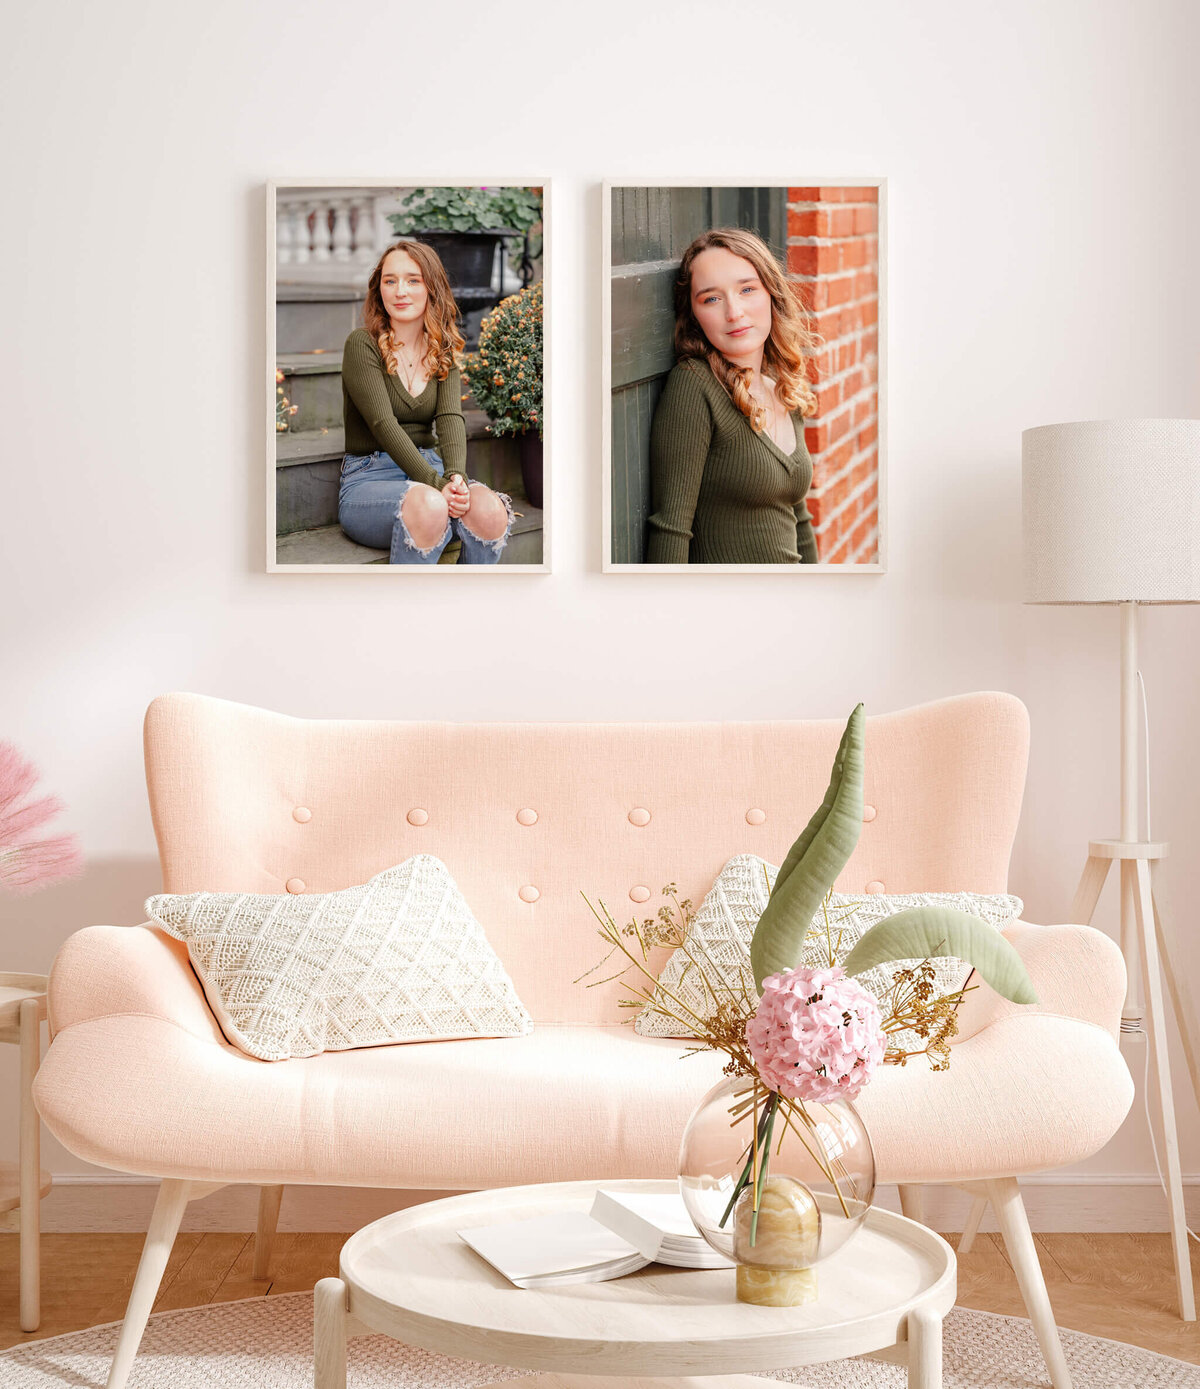 A senior, wearing a green sweater and jeans, is featured in two large framed images. The images are above a pink couch.